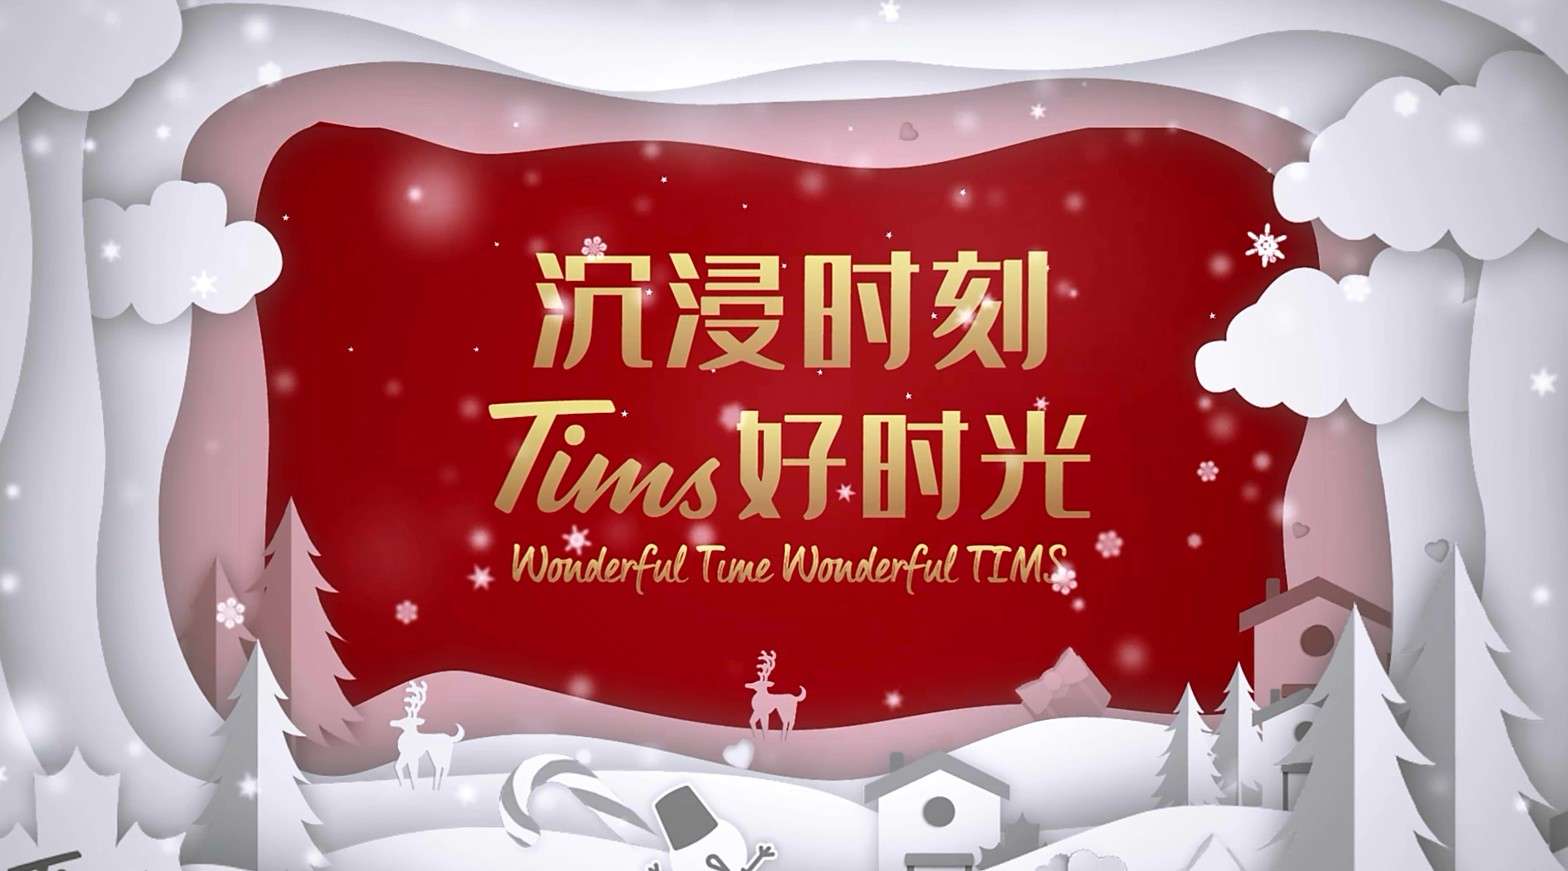 【Tims_Christmas】15s朋友圈视频